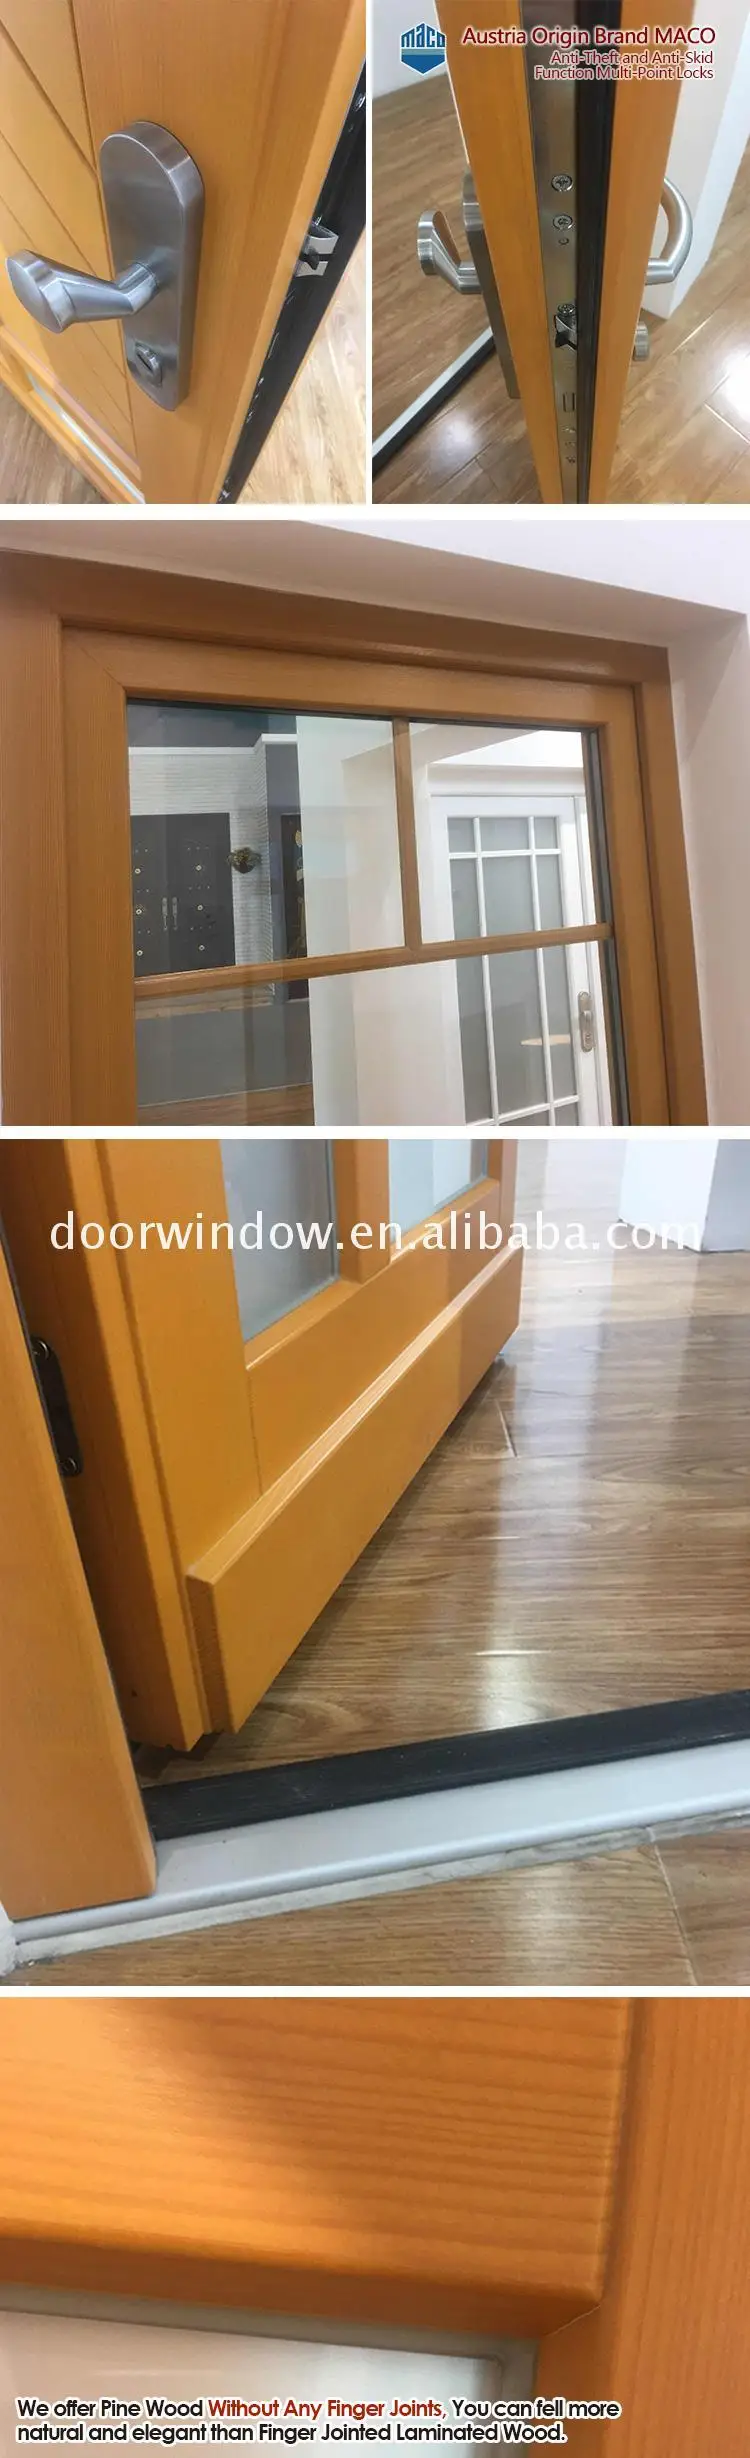 Chinese factory metal entry doors manufacturers of aluminium main single door designs for home